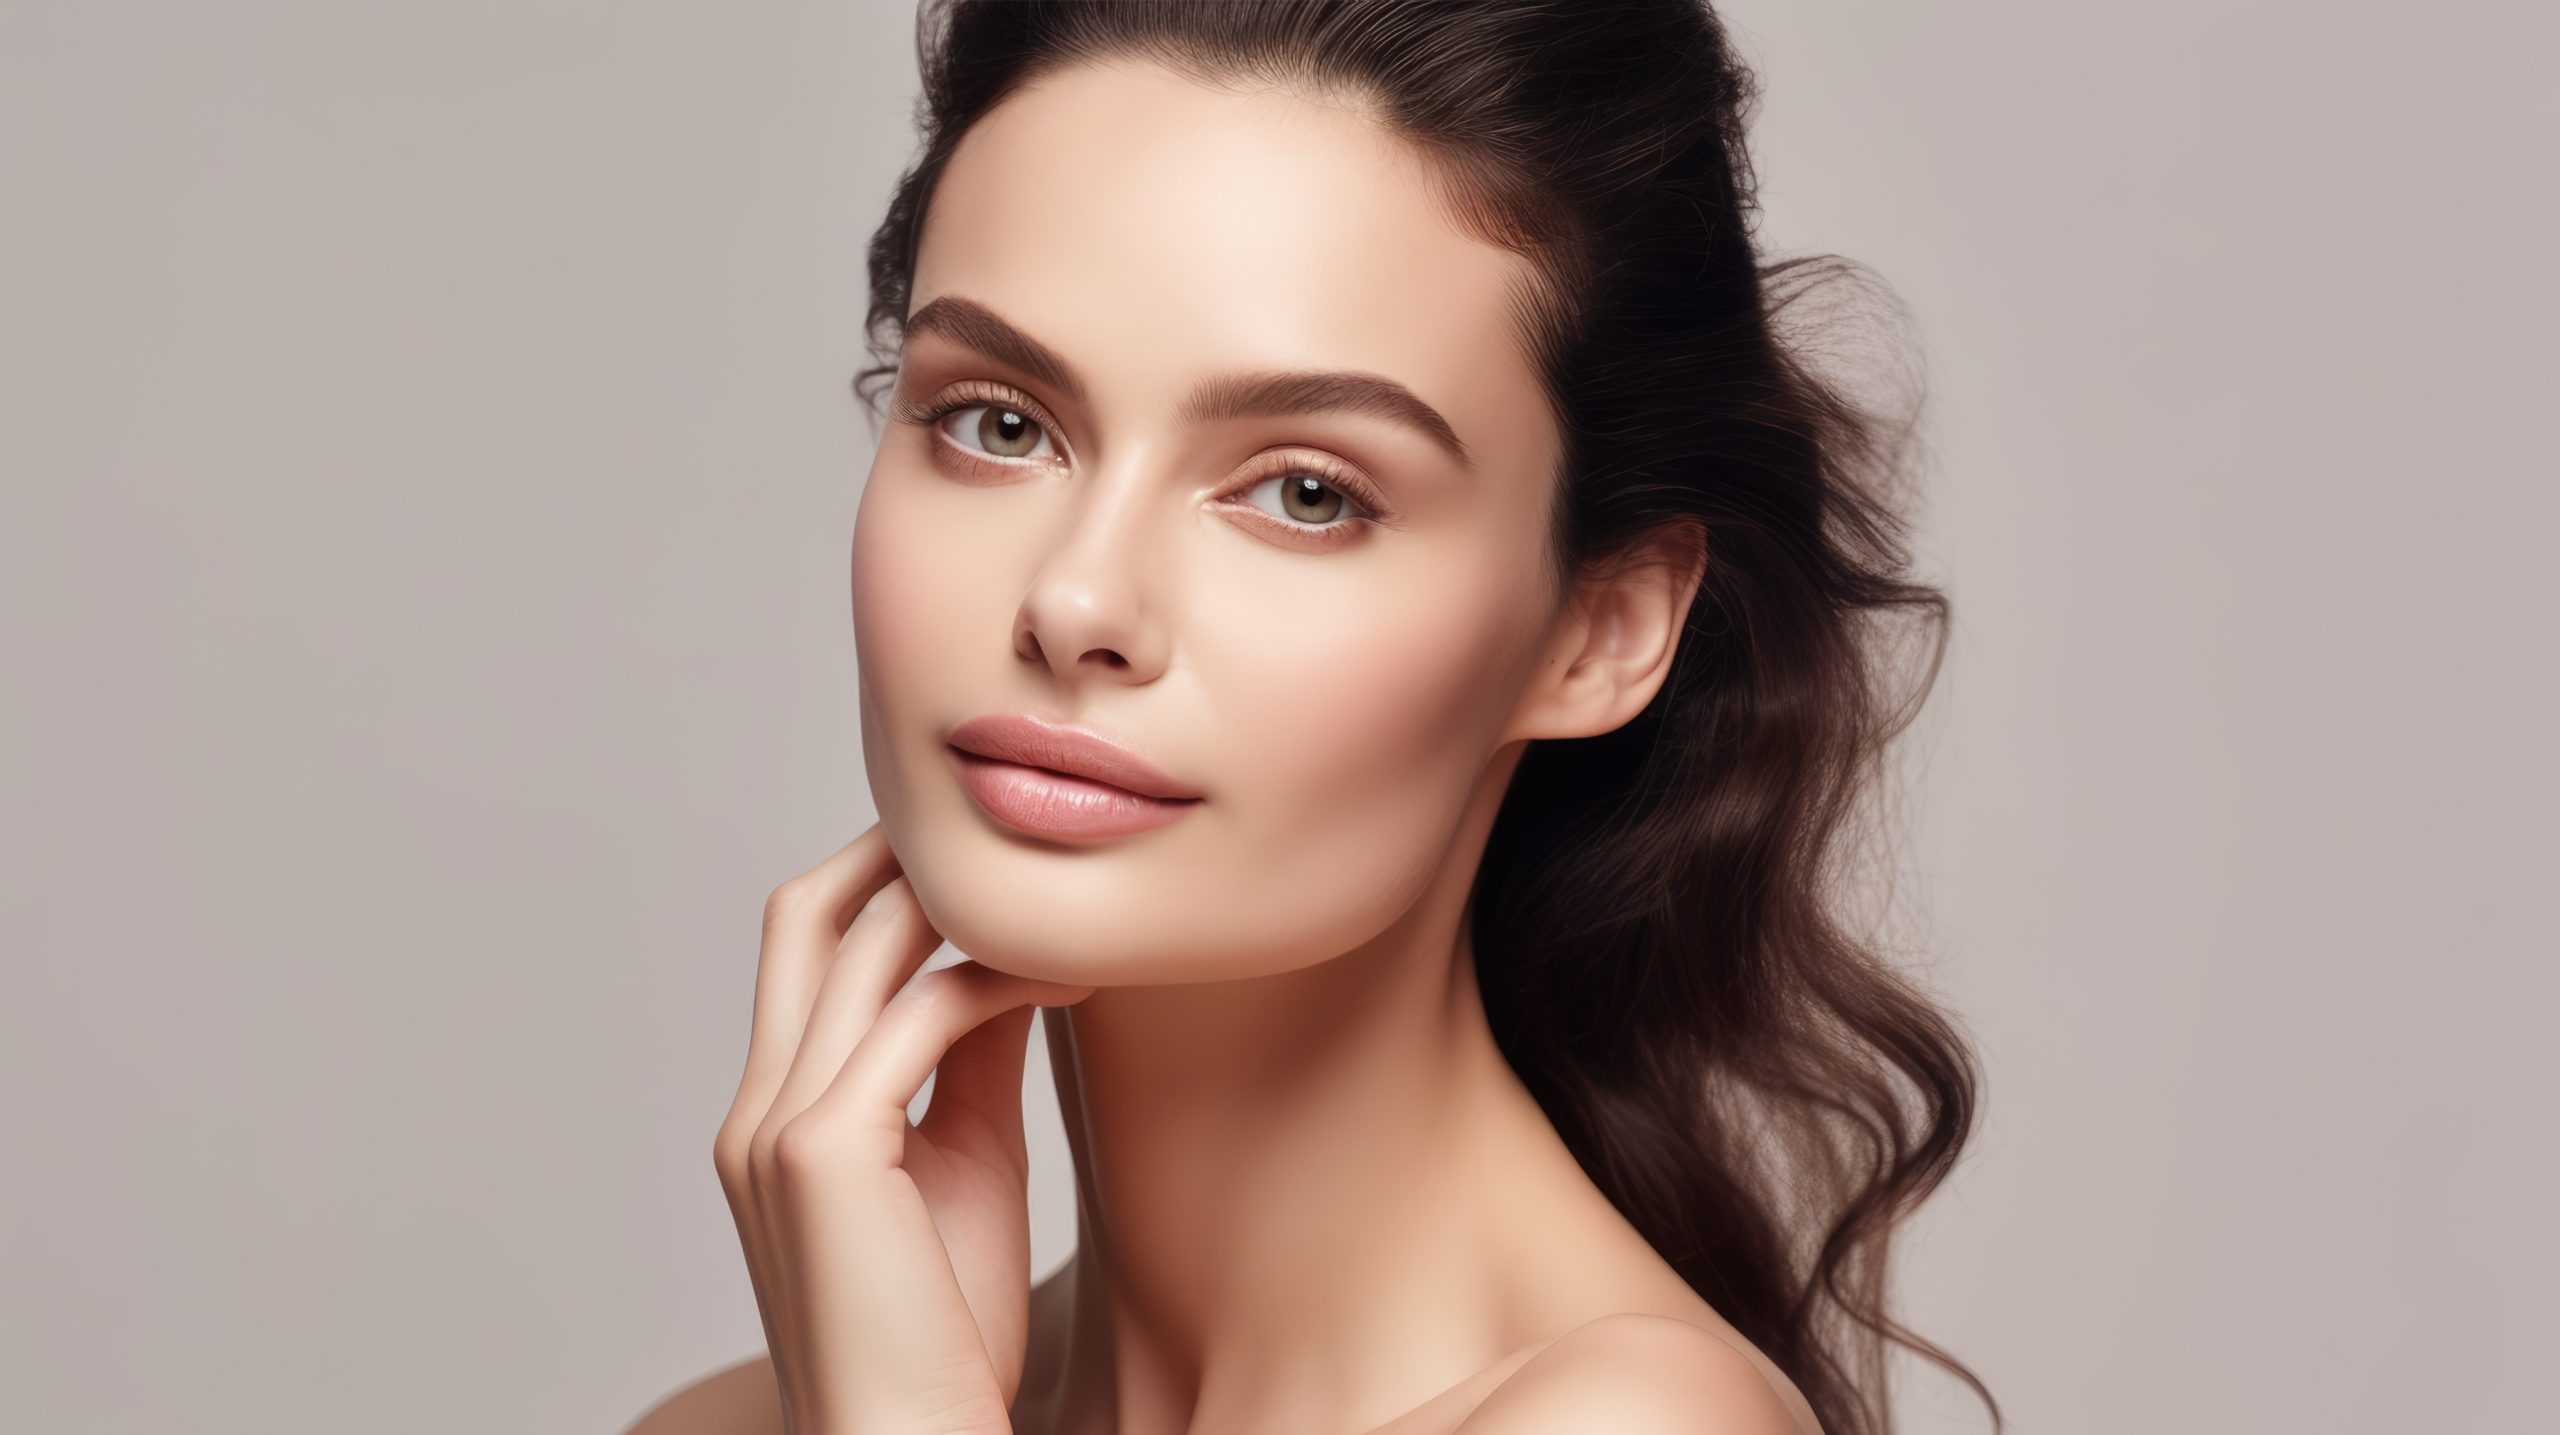 7 Benefits of Using Radiofrequency for Skin Rejuvenation and Anti-Aging